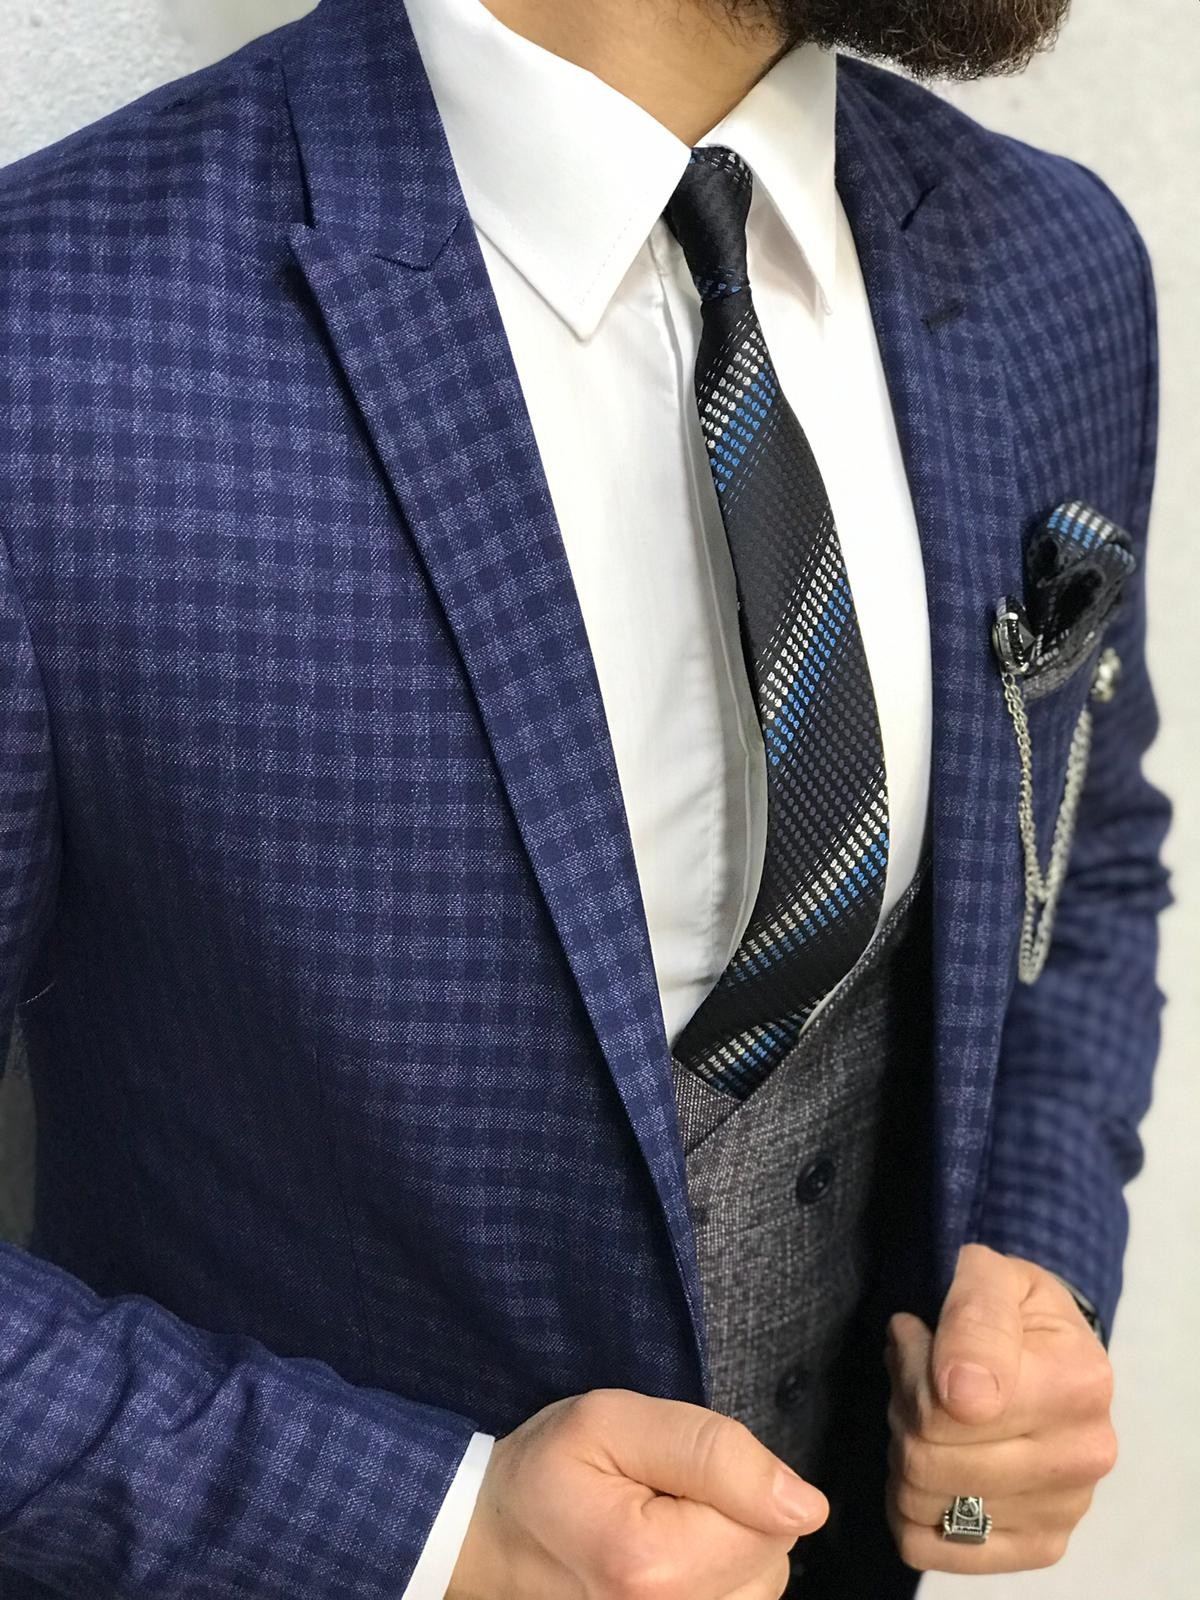 Buy Blue Slim Fit Plaid Wool Suit by Gentwith.com with Free Shipping